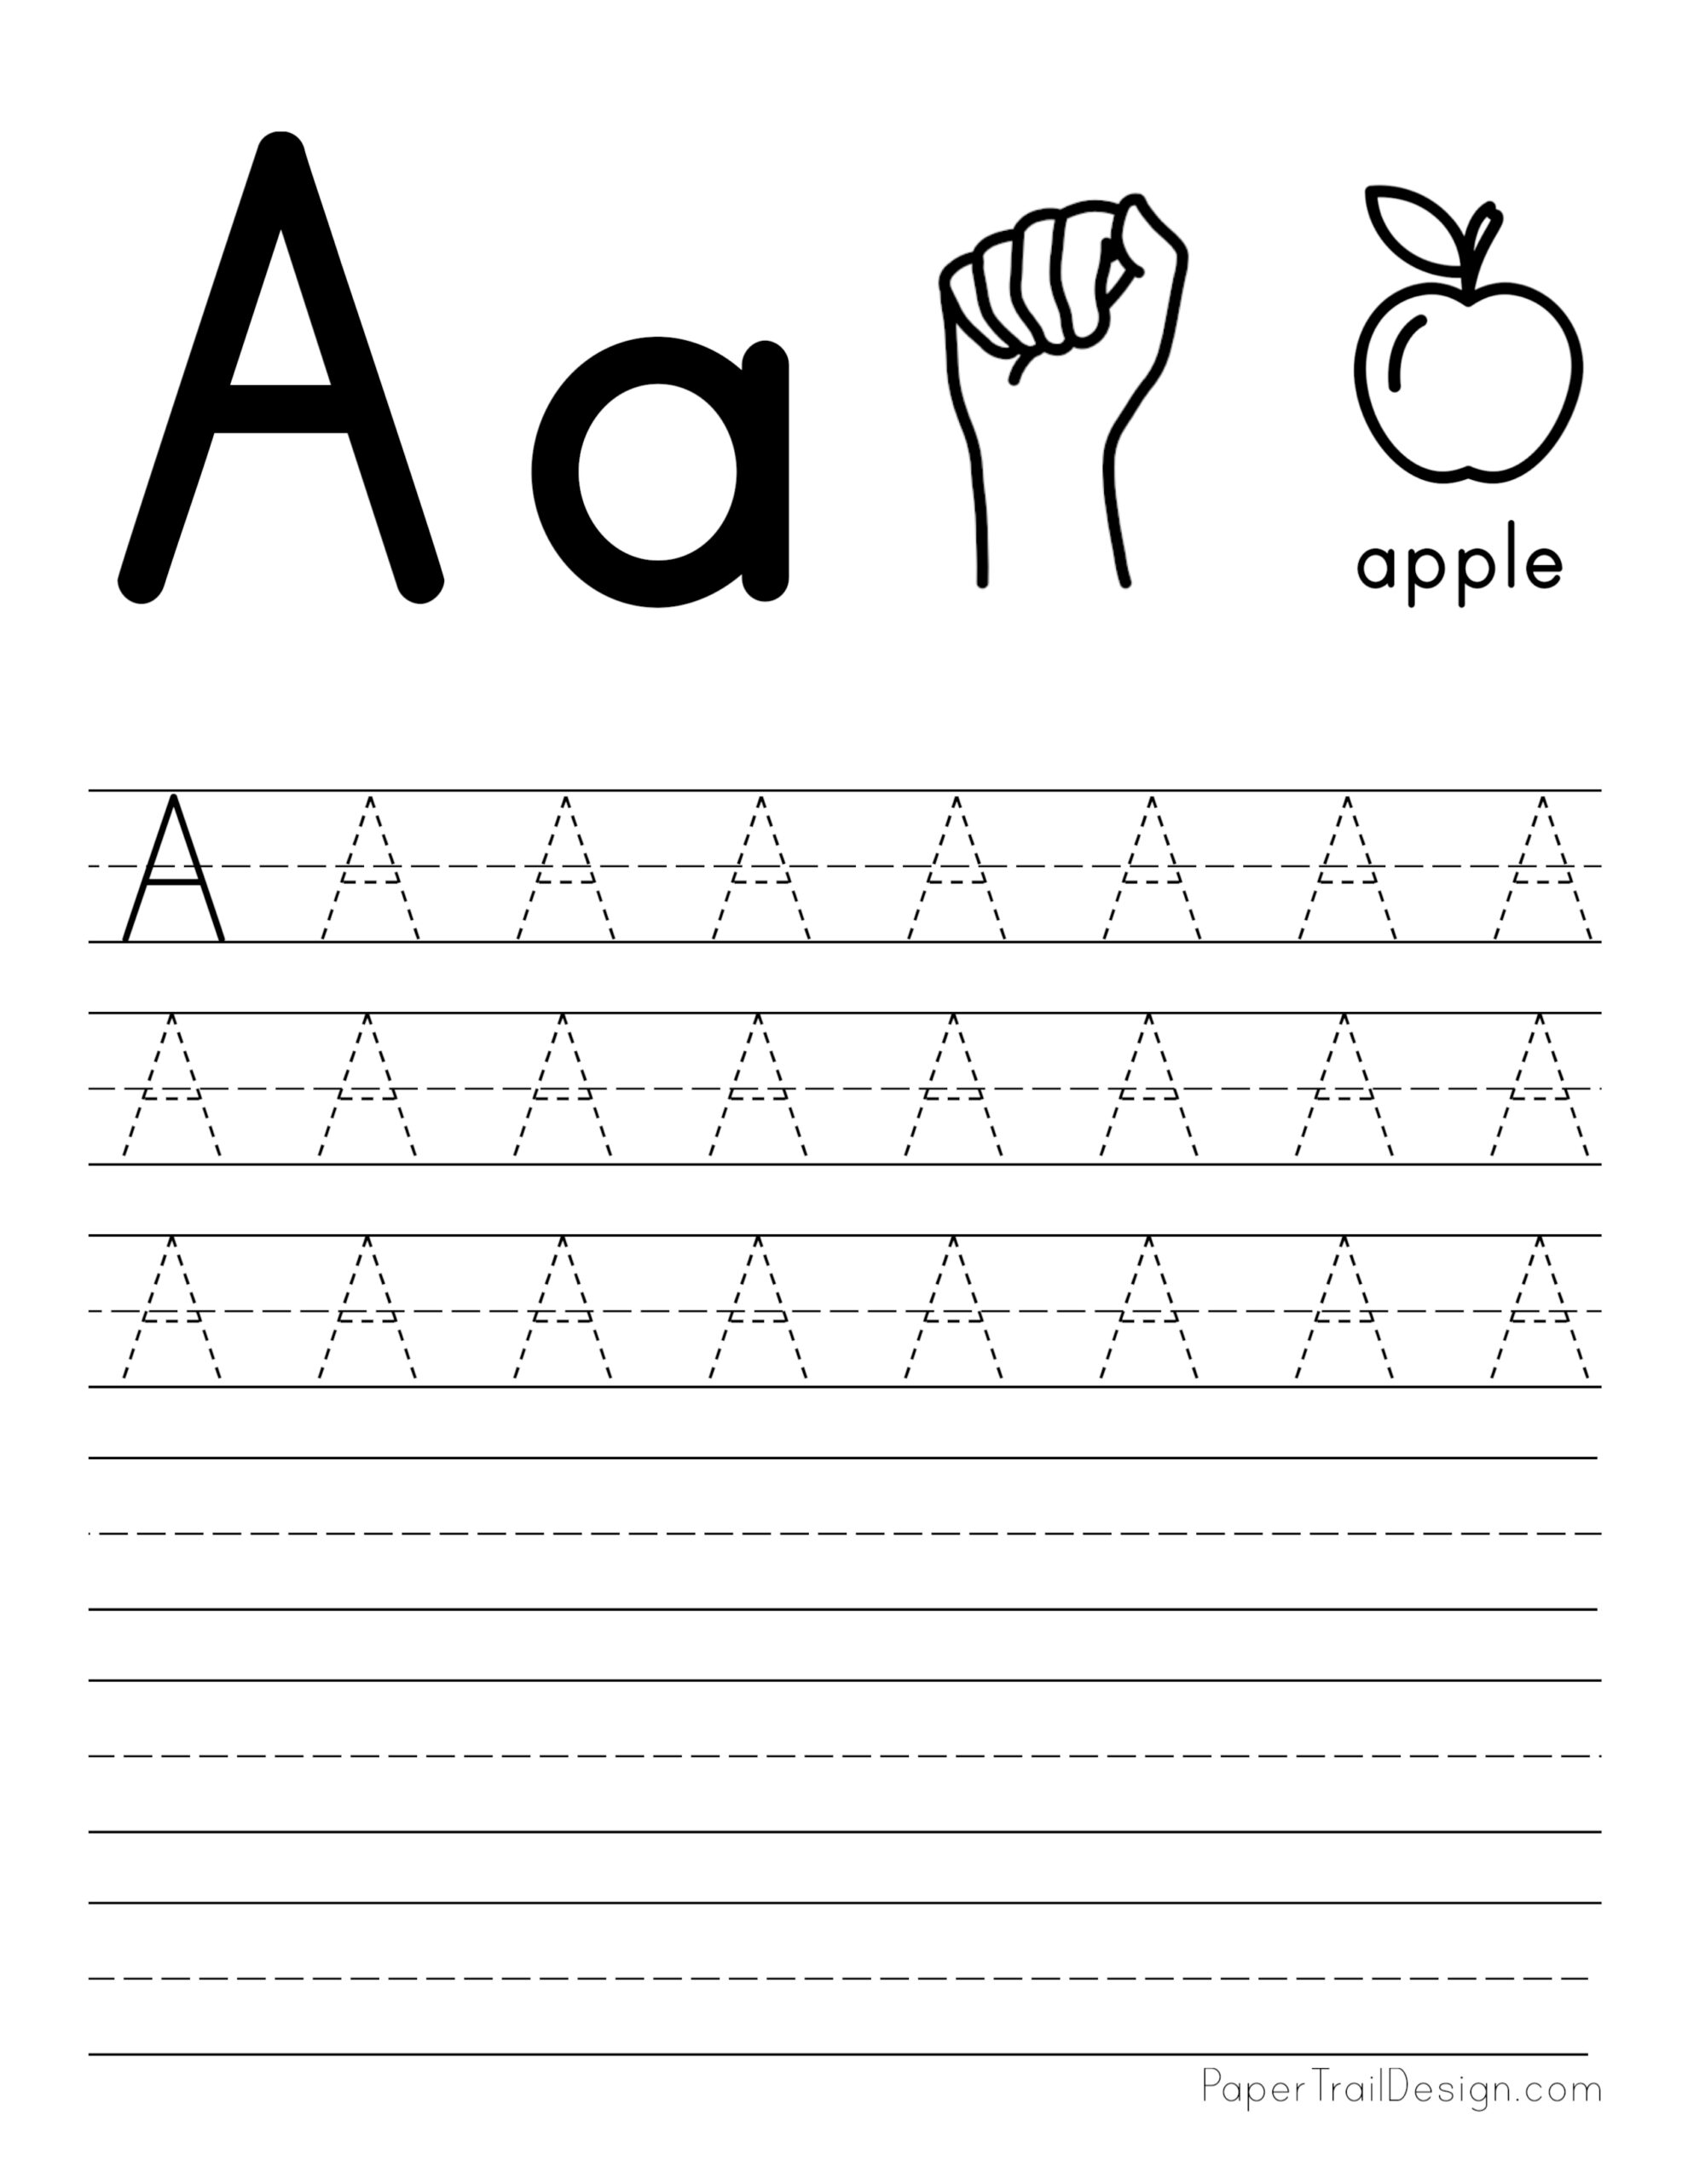 printable-letter-a-tracing-worksheet-with-number-and-arrow-guides-lupon-gov-ph